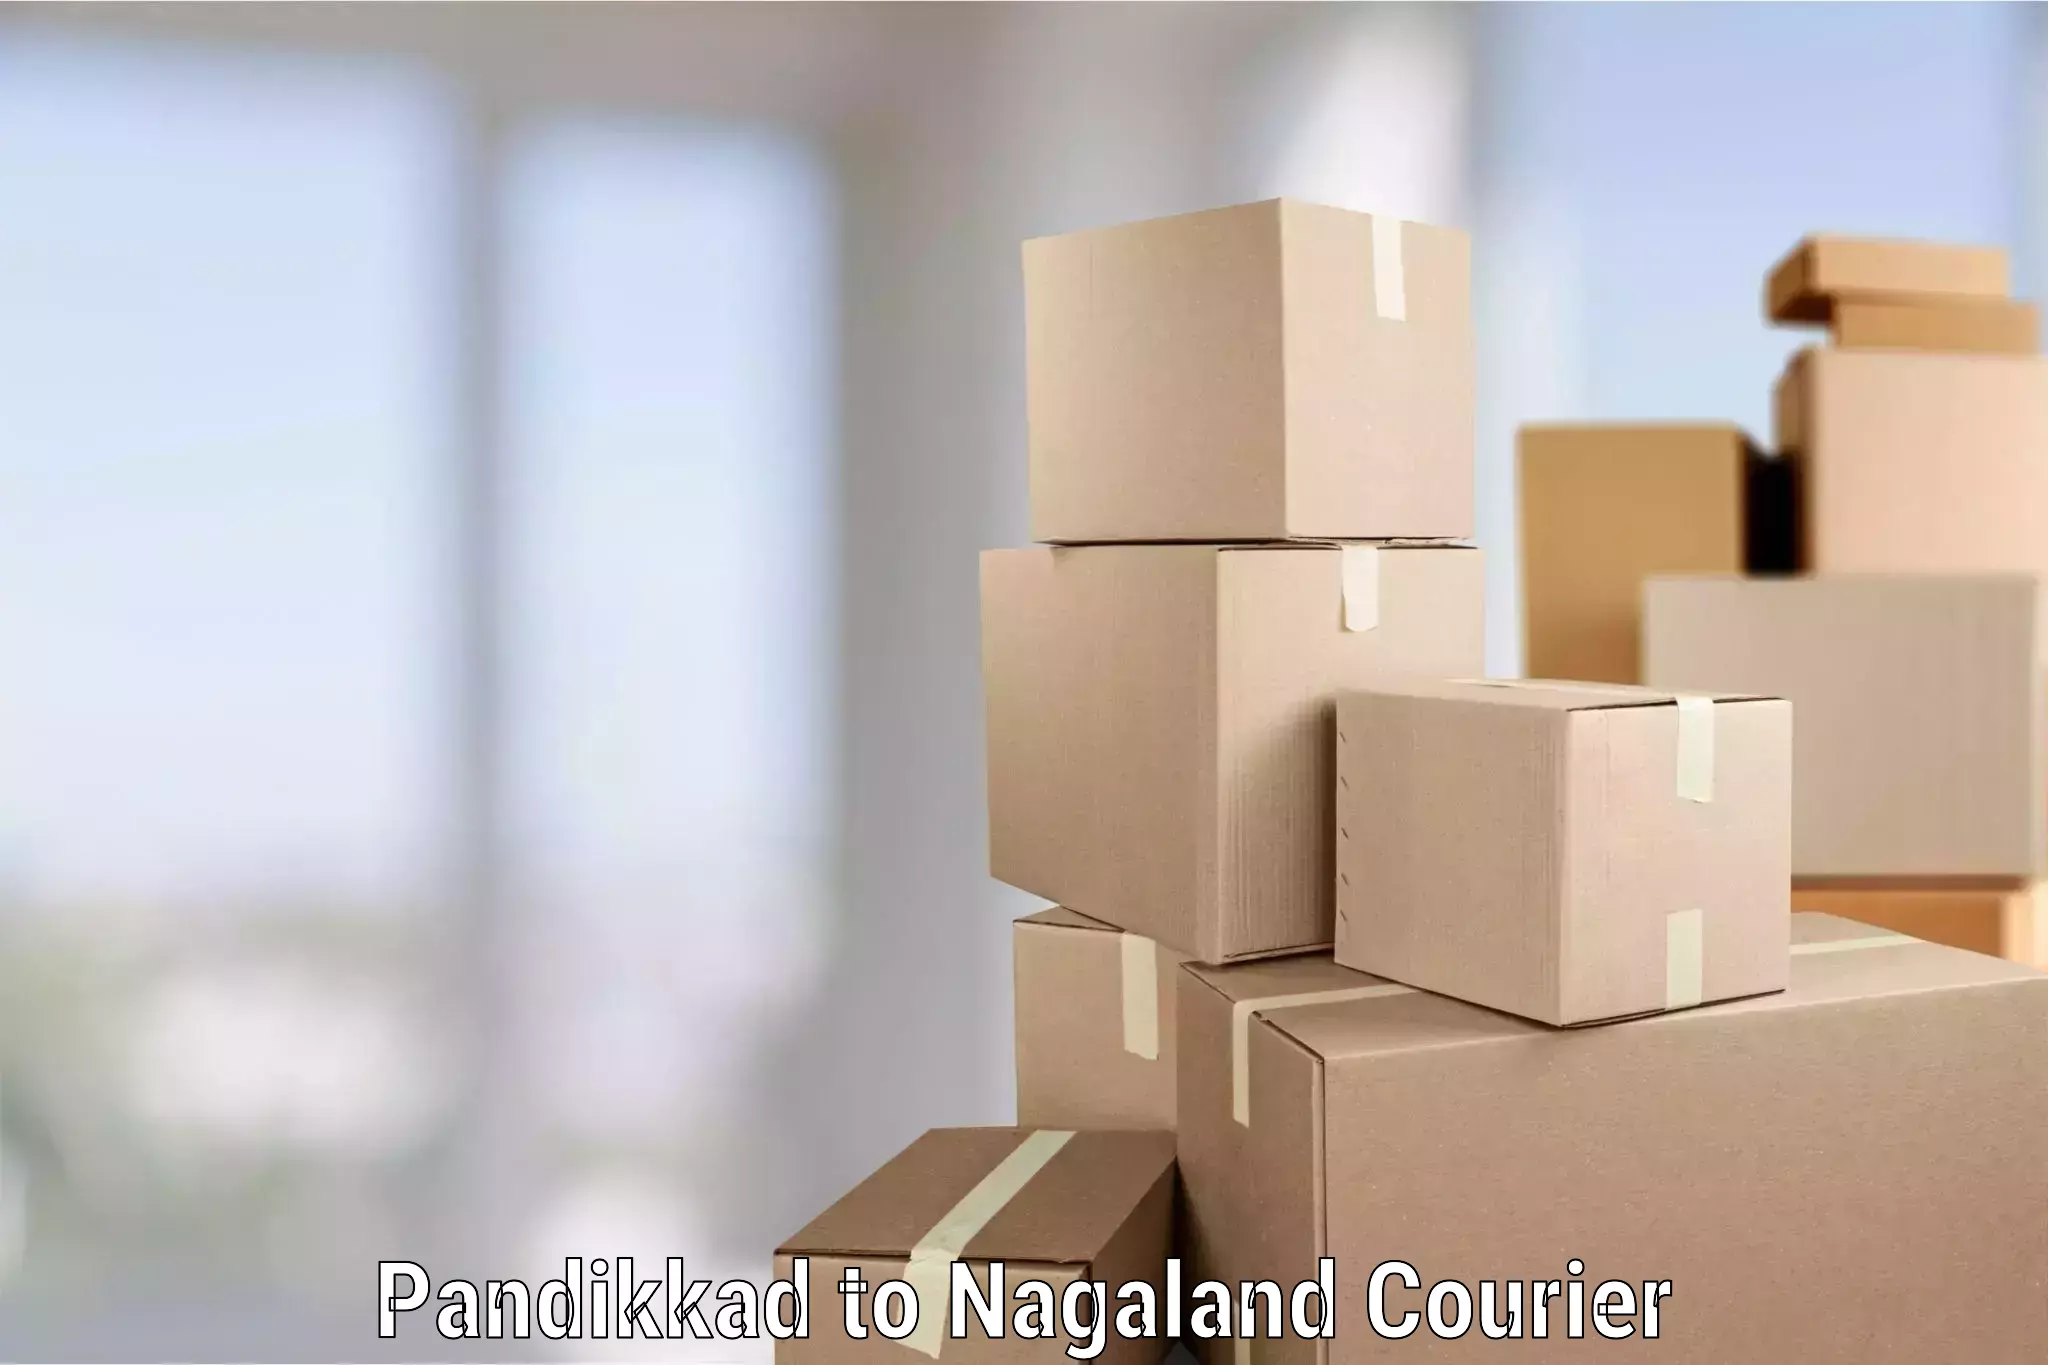 Efficient moving company in Pandikkad to Nagaland